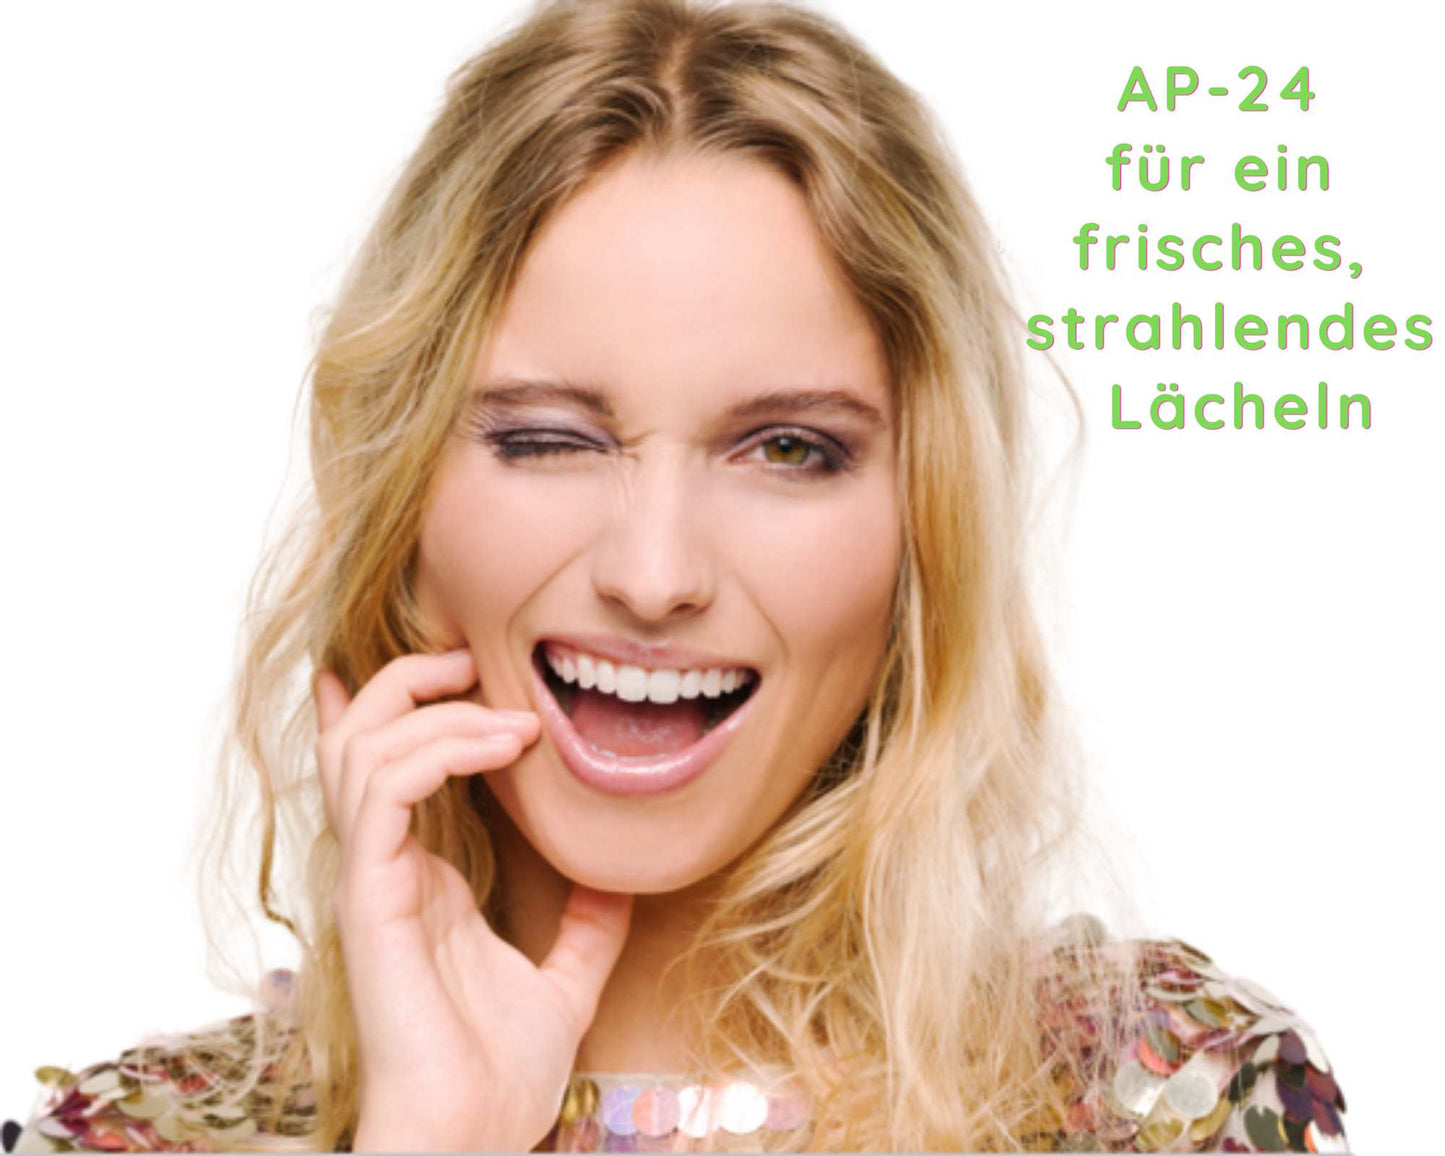 Woman with beautiful white teeth - Ap-24 for a fresh, radiant smile